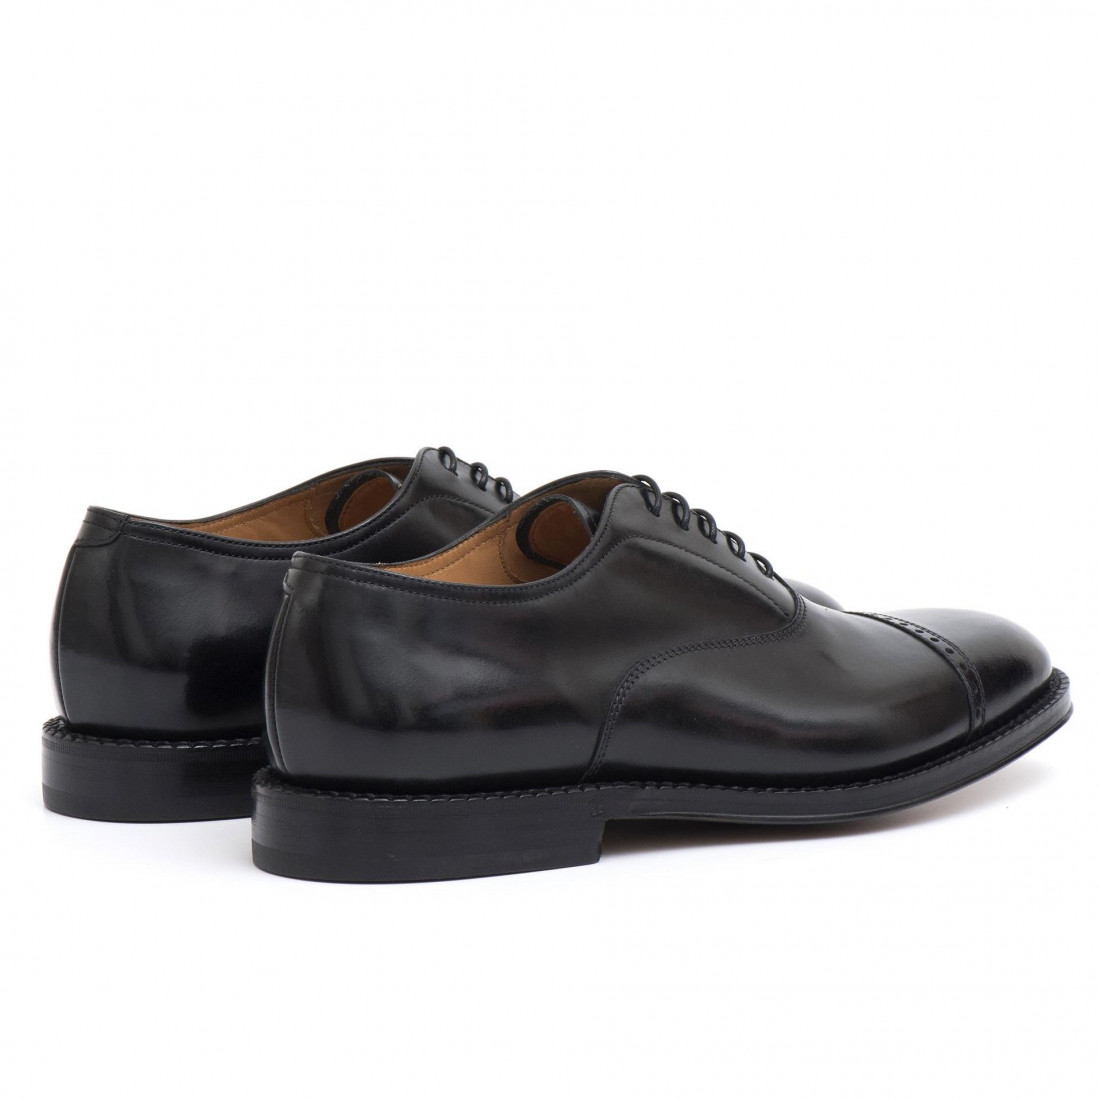 Must Eve Fabi John oxford shoes in black leather